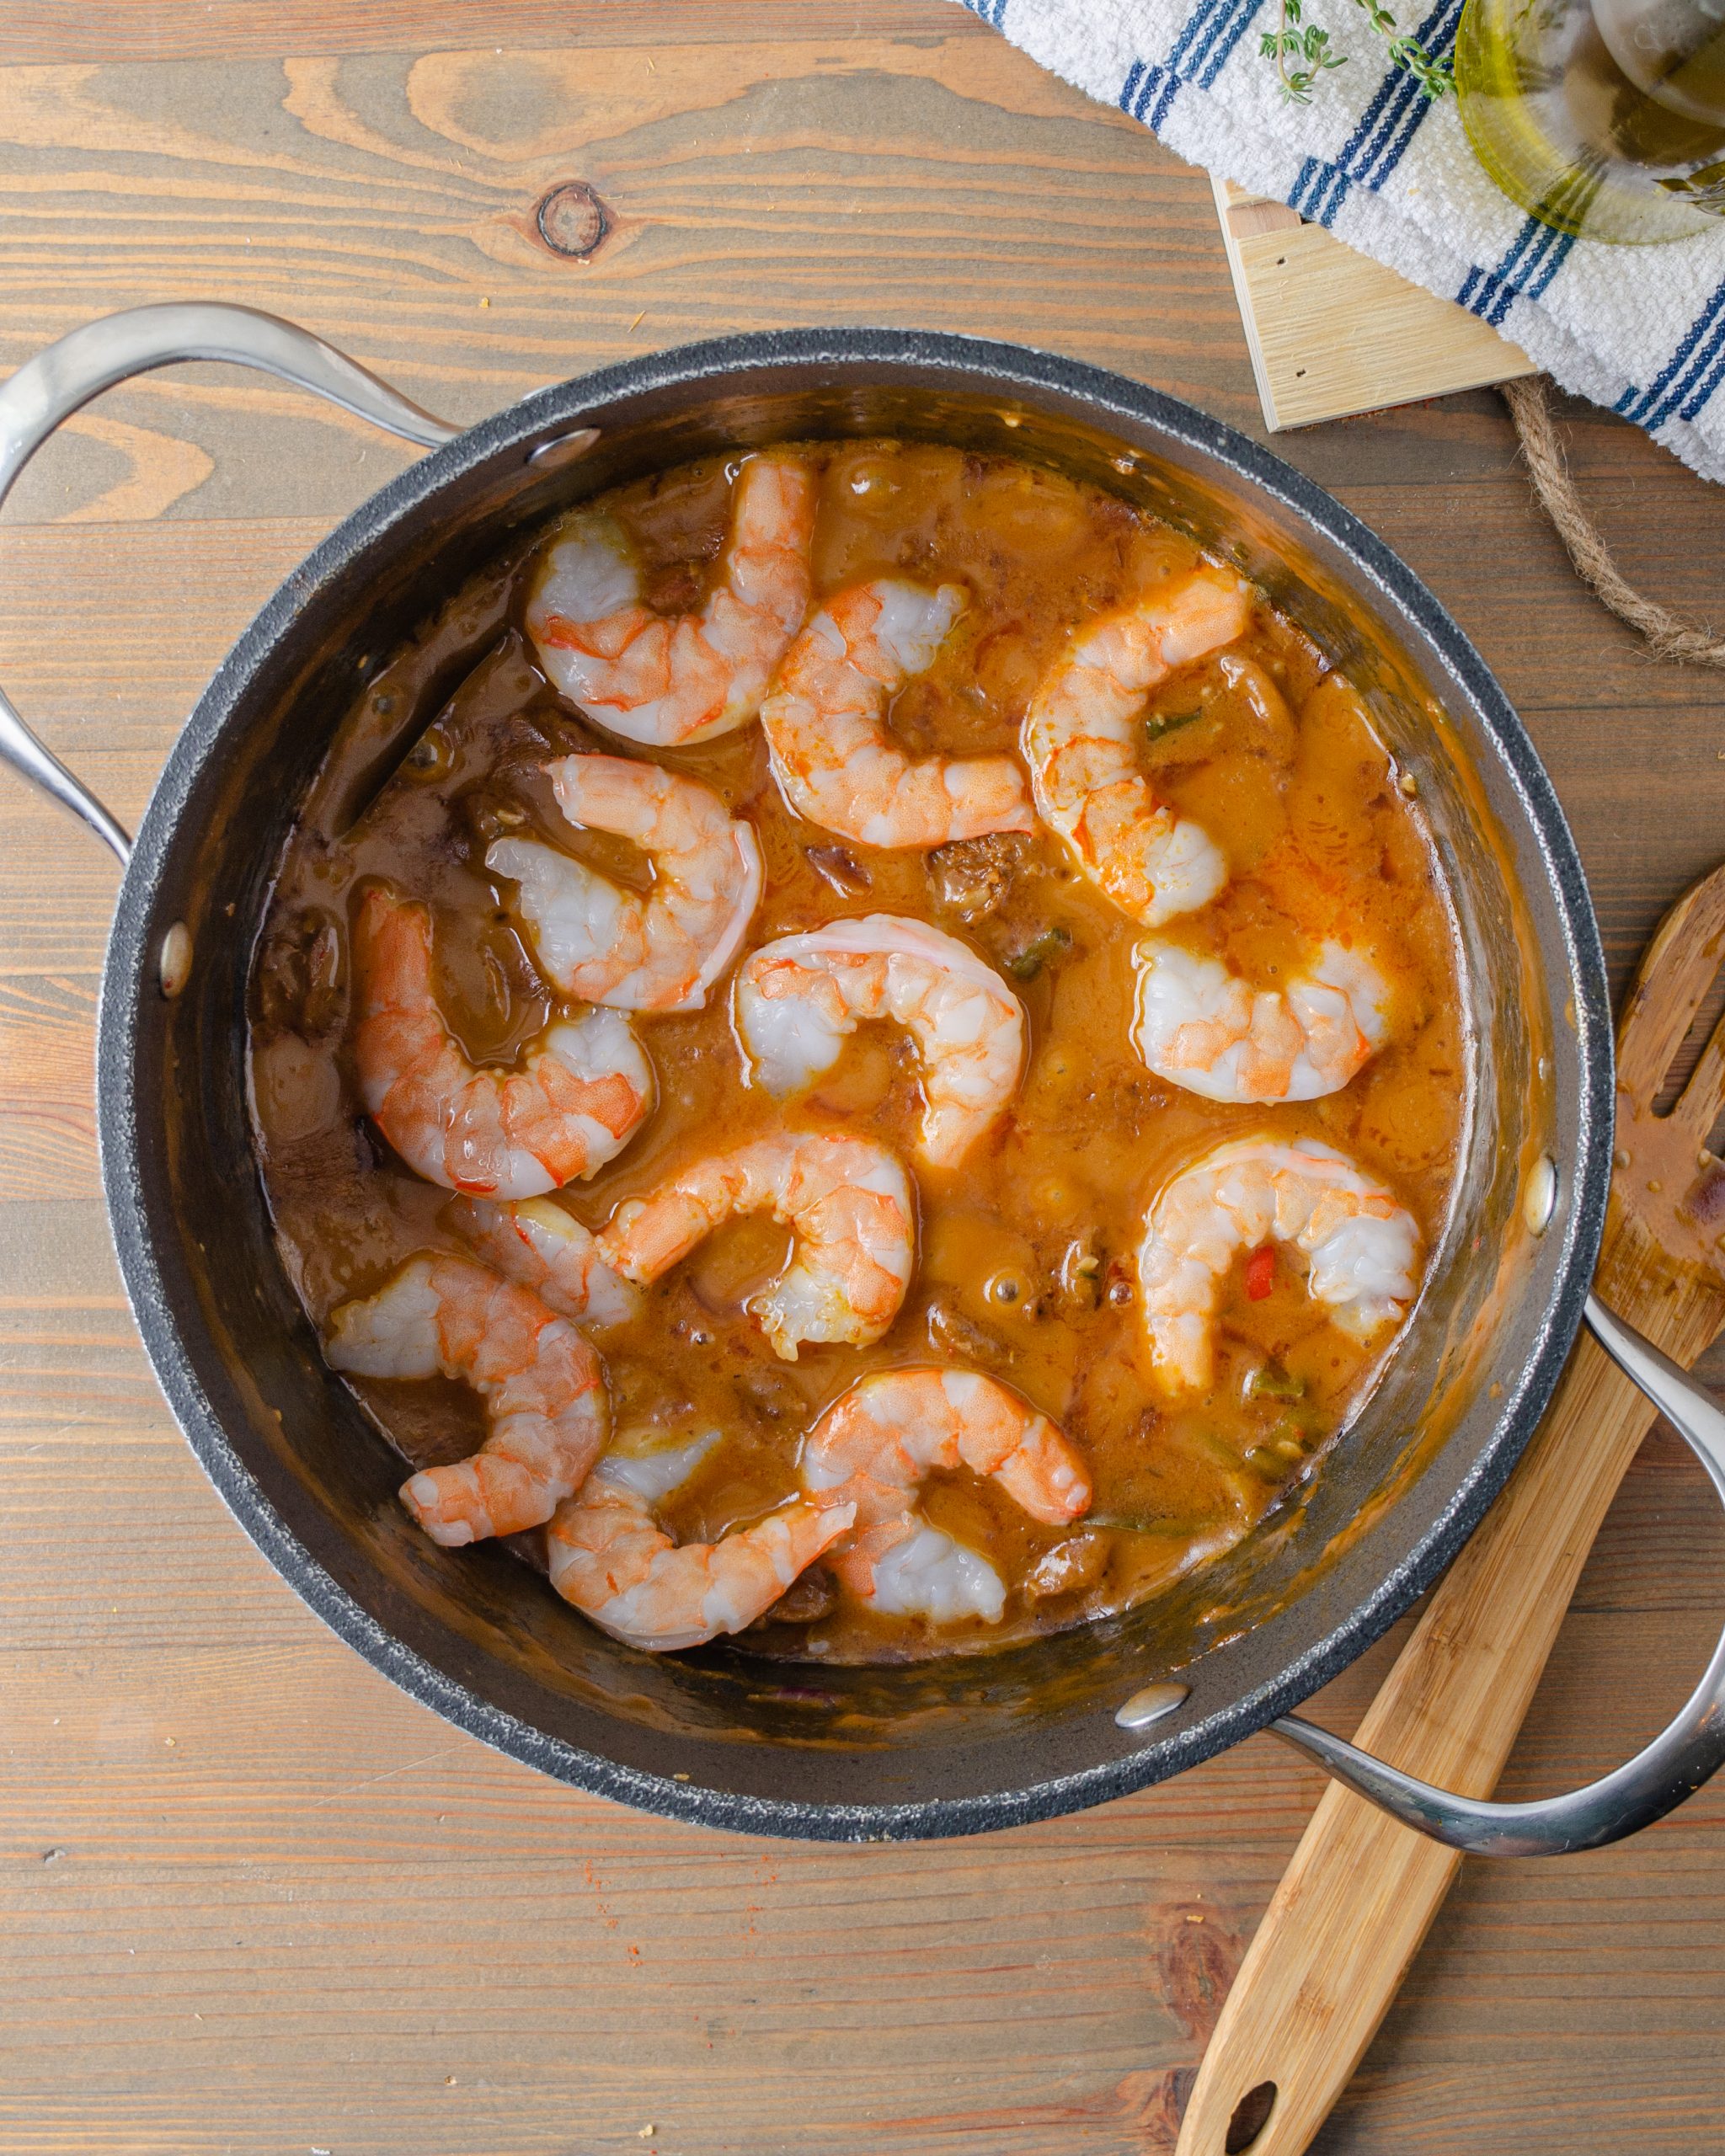 Stir the shrimp into the pot, and simmer for 5-10 minutes until they are cooked well. 